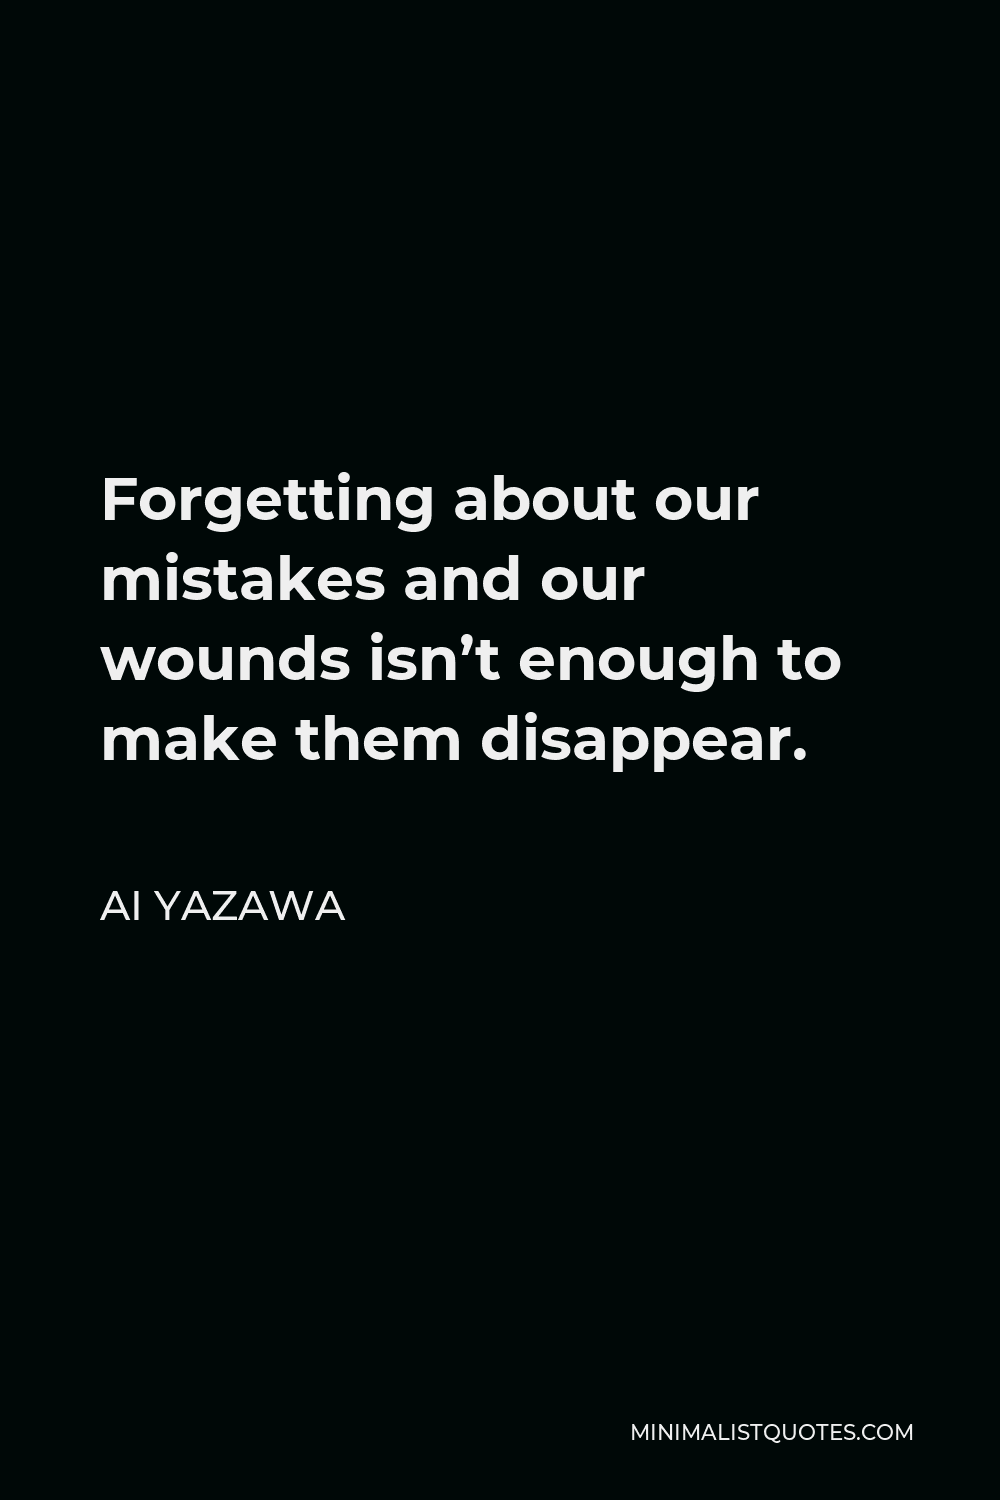 Ai Yazawa Quote - Forgetting about our mistakes and our wounds isn’t enough to make them disappear.